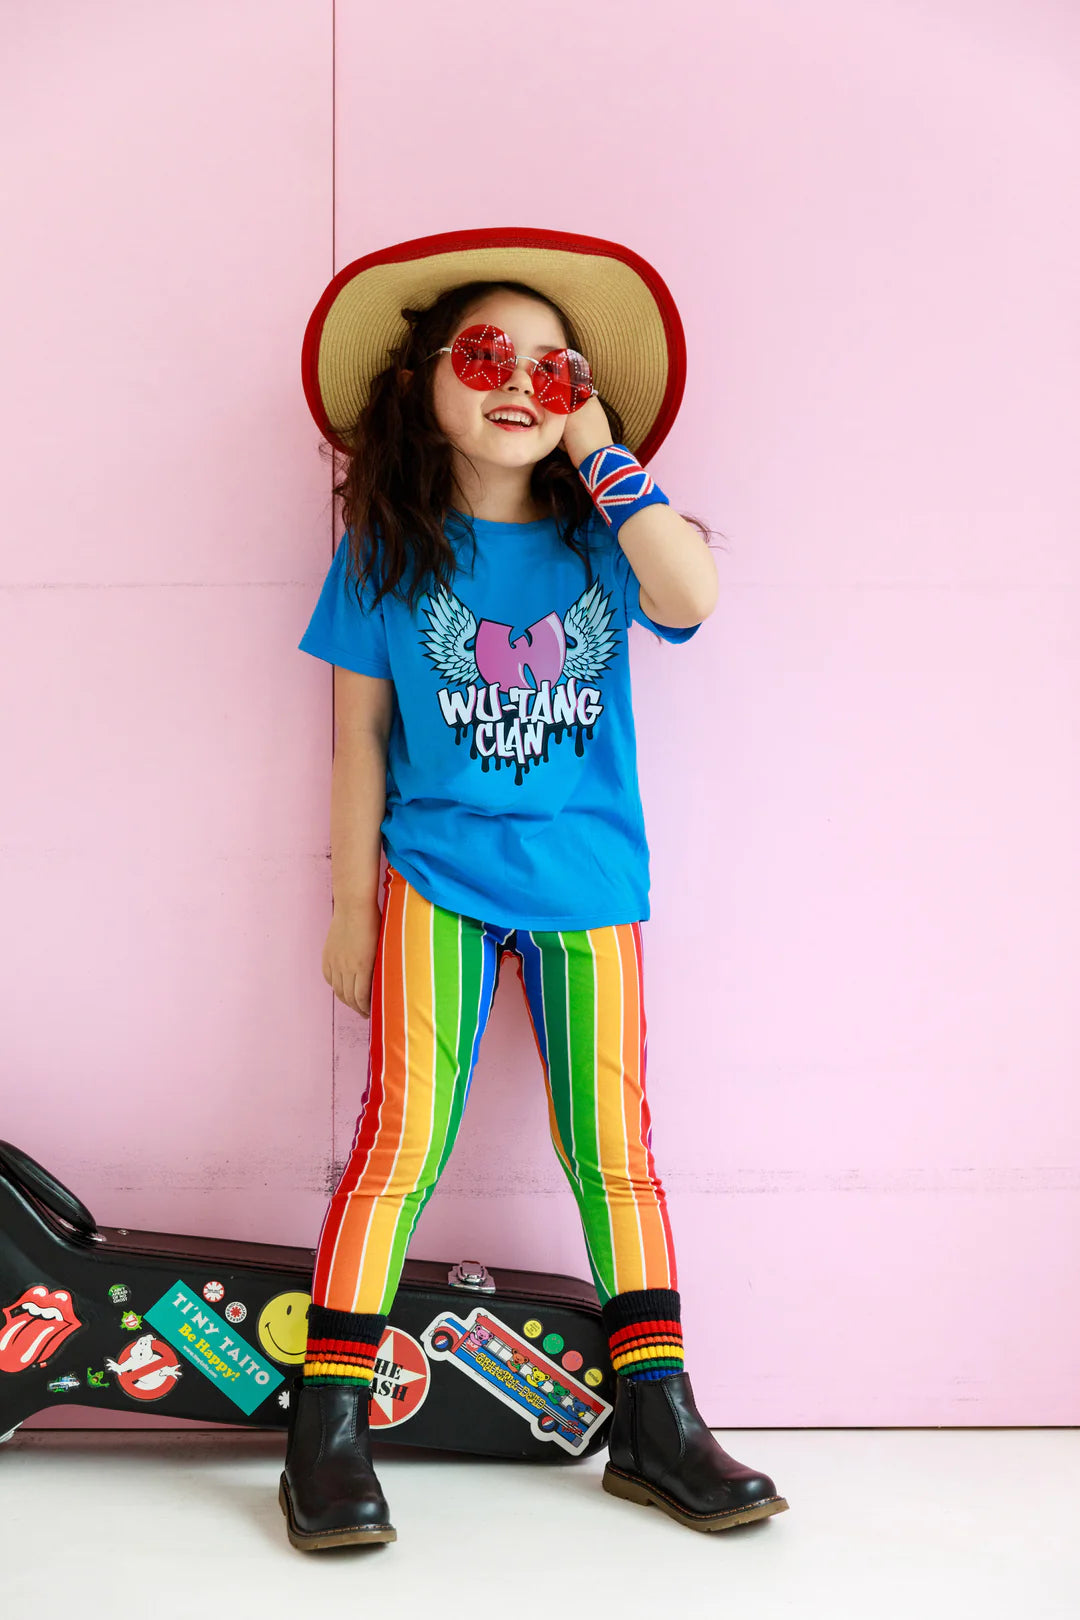 Child wearing a star hat, red sunglasses, rainbow striped pants and blue Wu-Tang Clan organic short sleeve tee